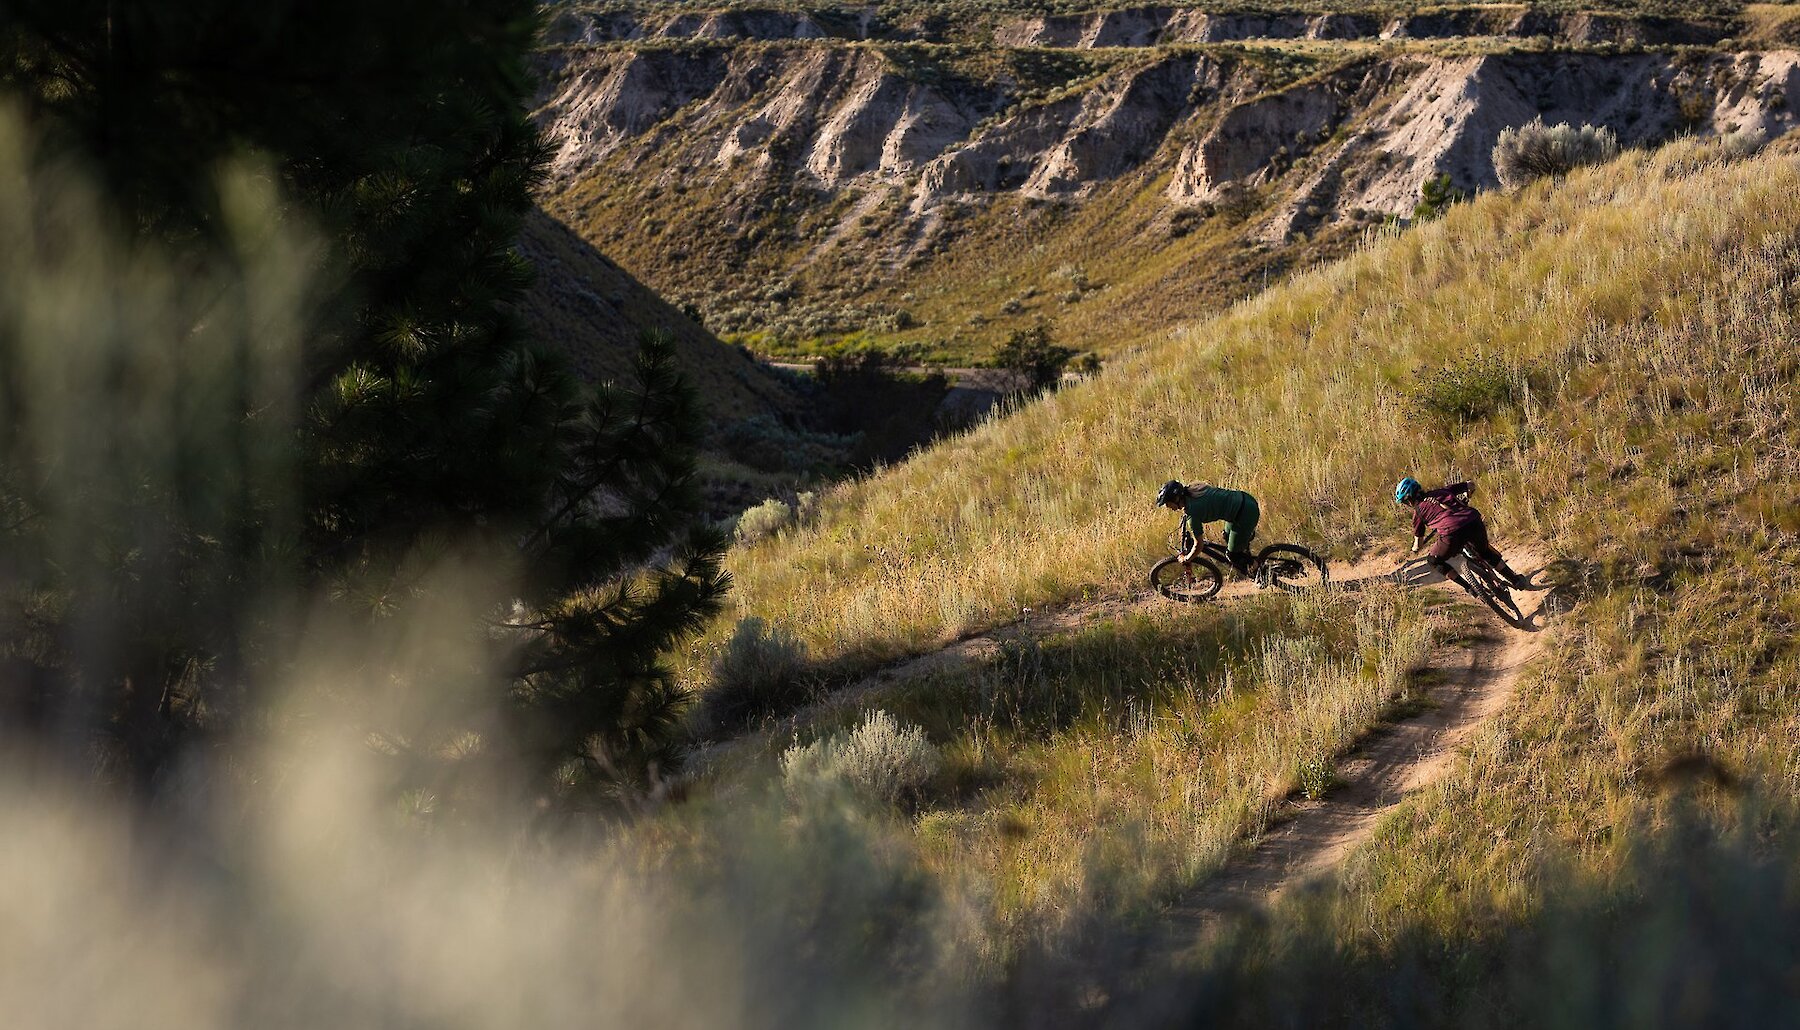 Two mountain bikers riding down a single track bike trail with picturesque canyons in the background at the Kamloops Bike Ranch.